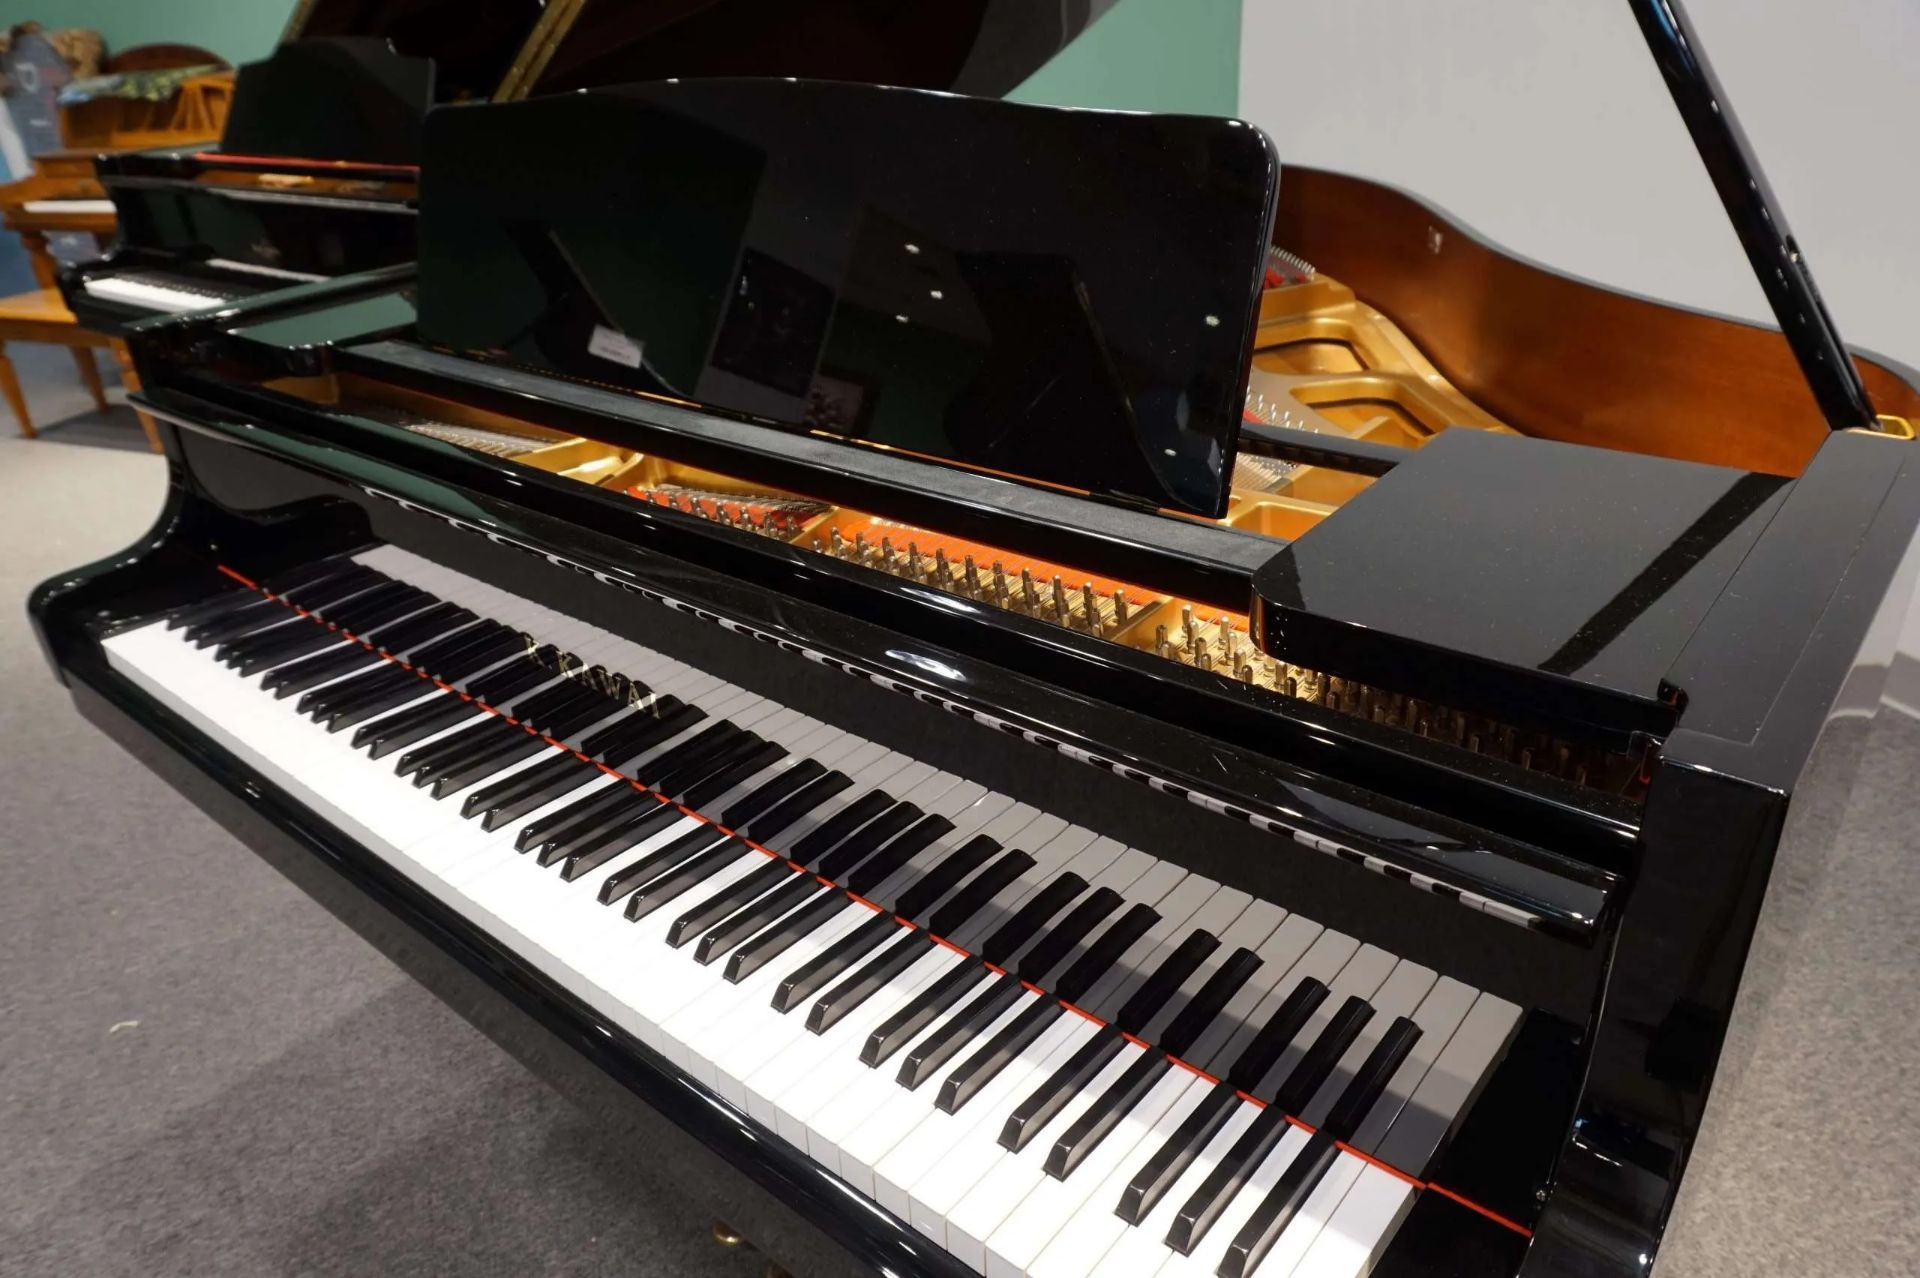 Kawai GM-10K Baby Grand Piano With Its Resonant Tone And Classic Good Looks, The GM-10K Is An - Image 3 of 9